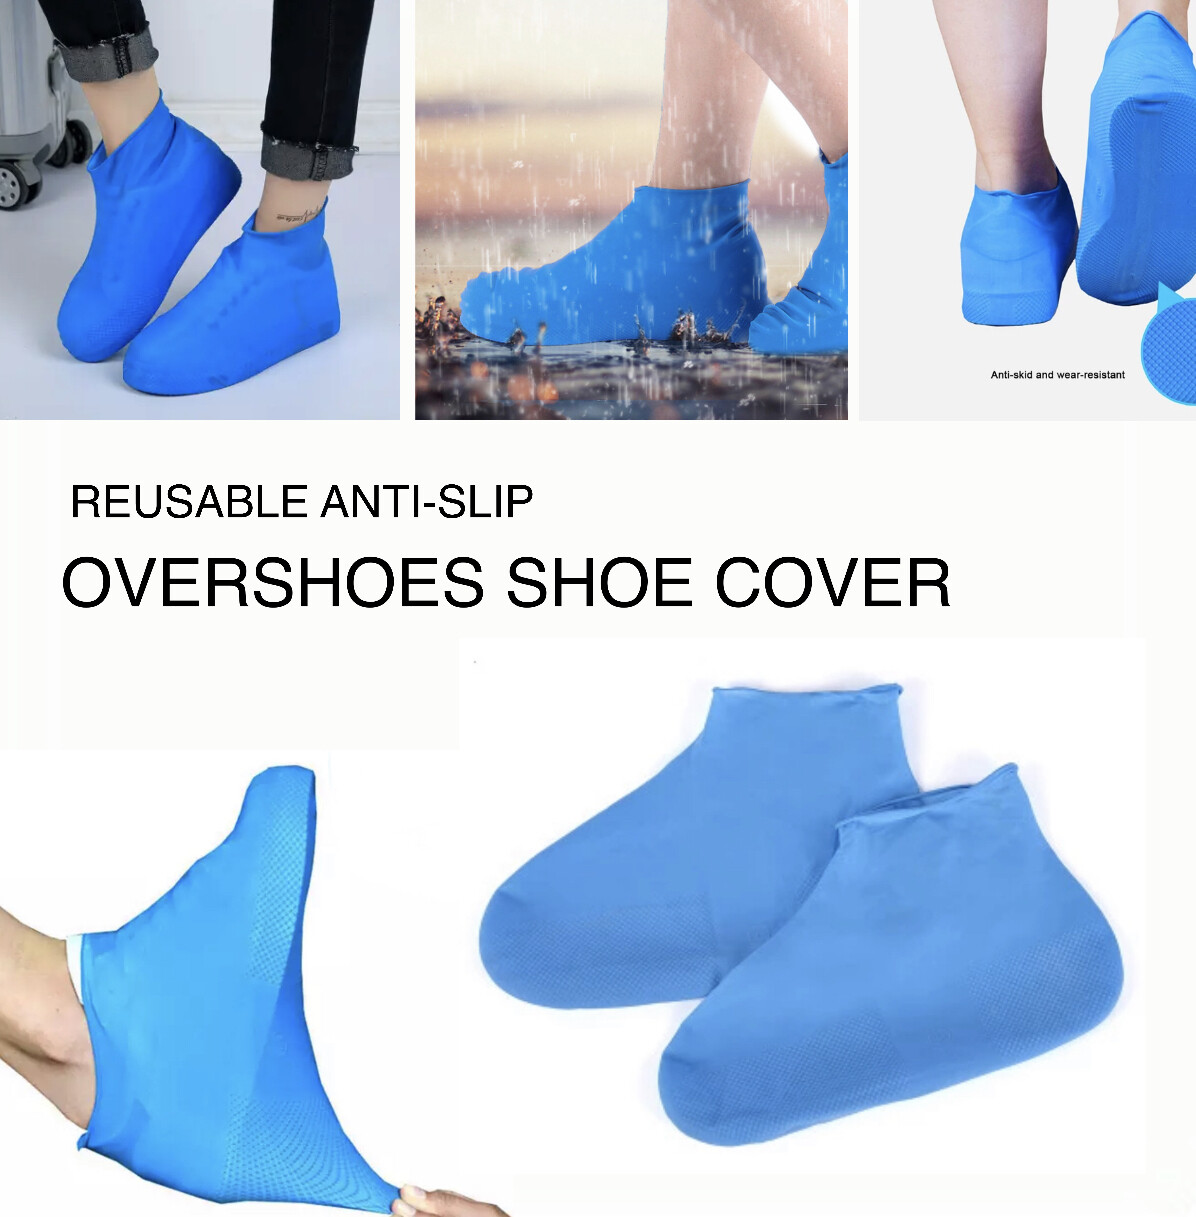 Overshoes Cover